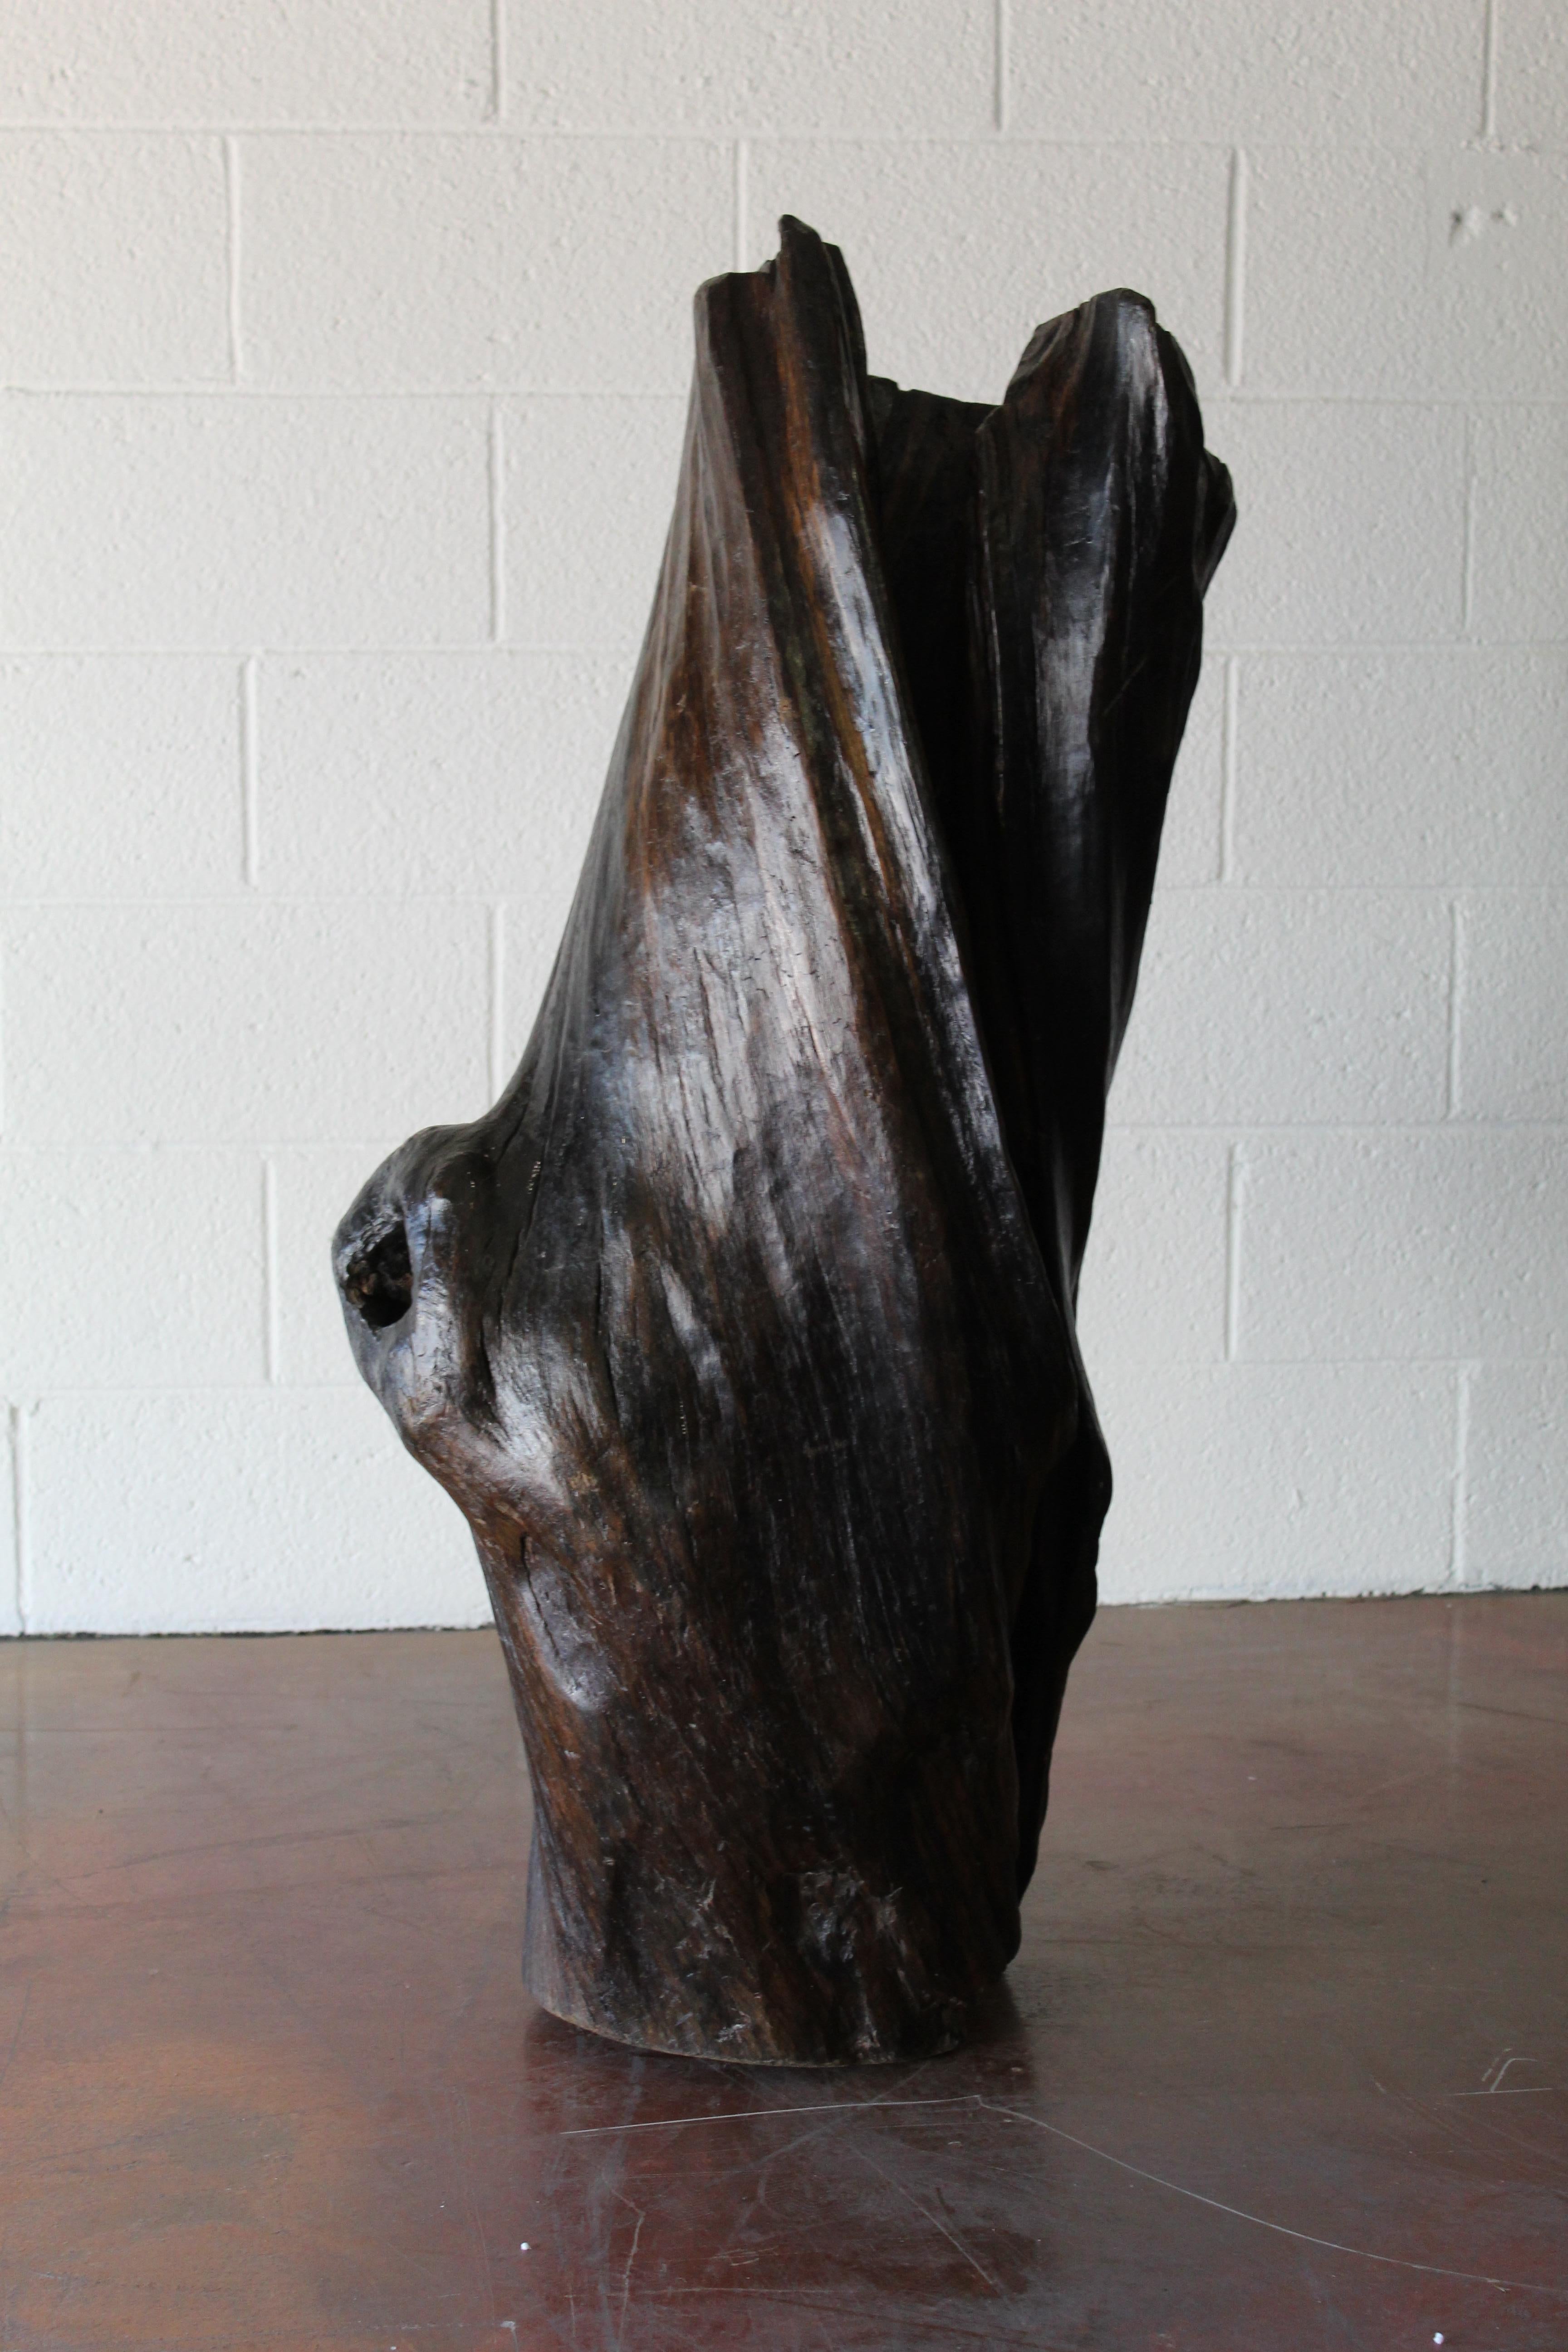 A lovely organic form - a vintage tree trunk sculpture. hallow.